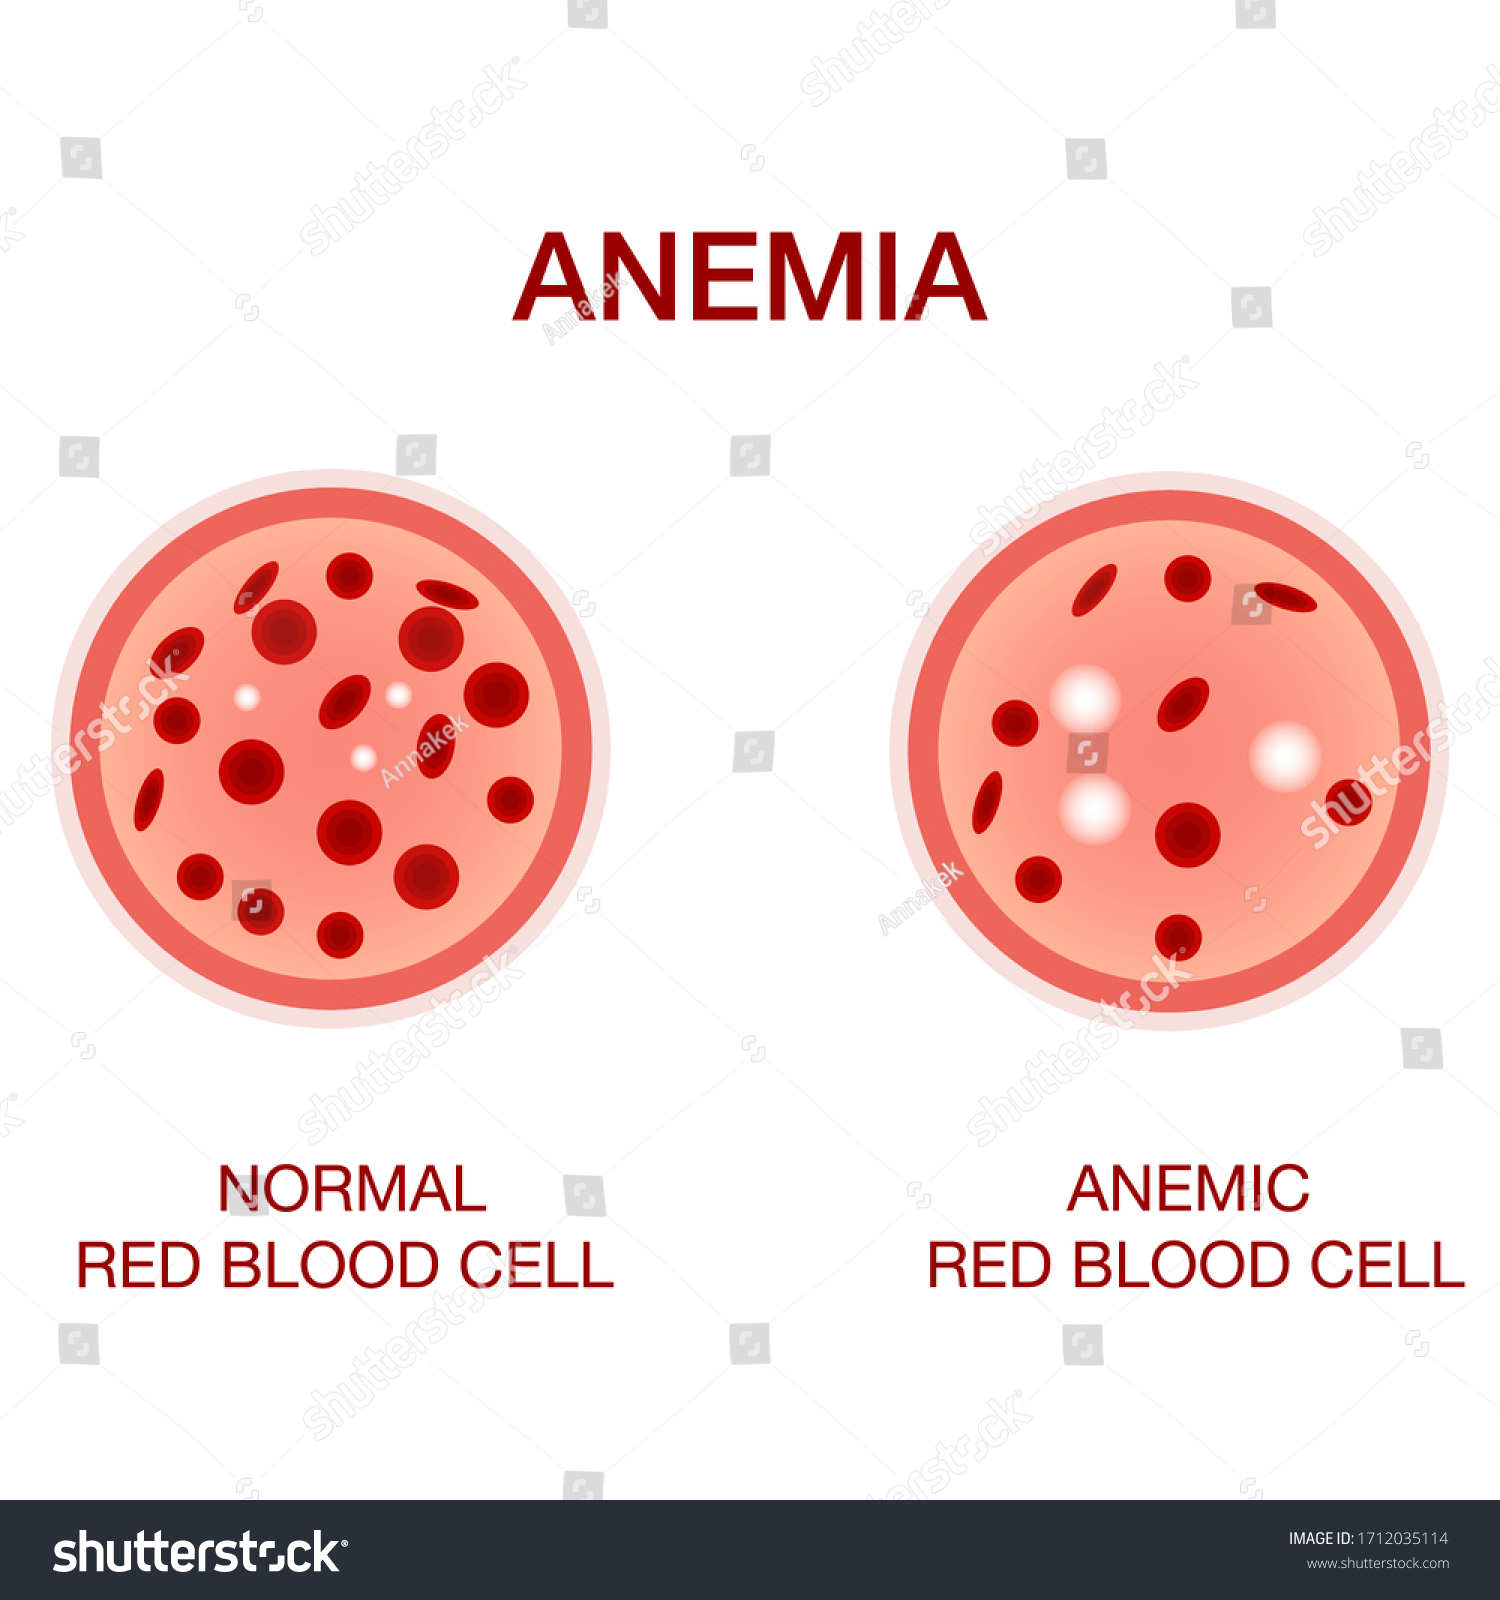 Infographic Image Anemia Difference Anemia Amount Stock Vector Royalty Free 1712035114 6640